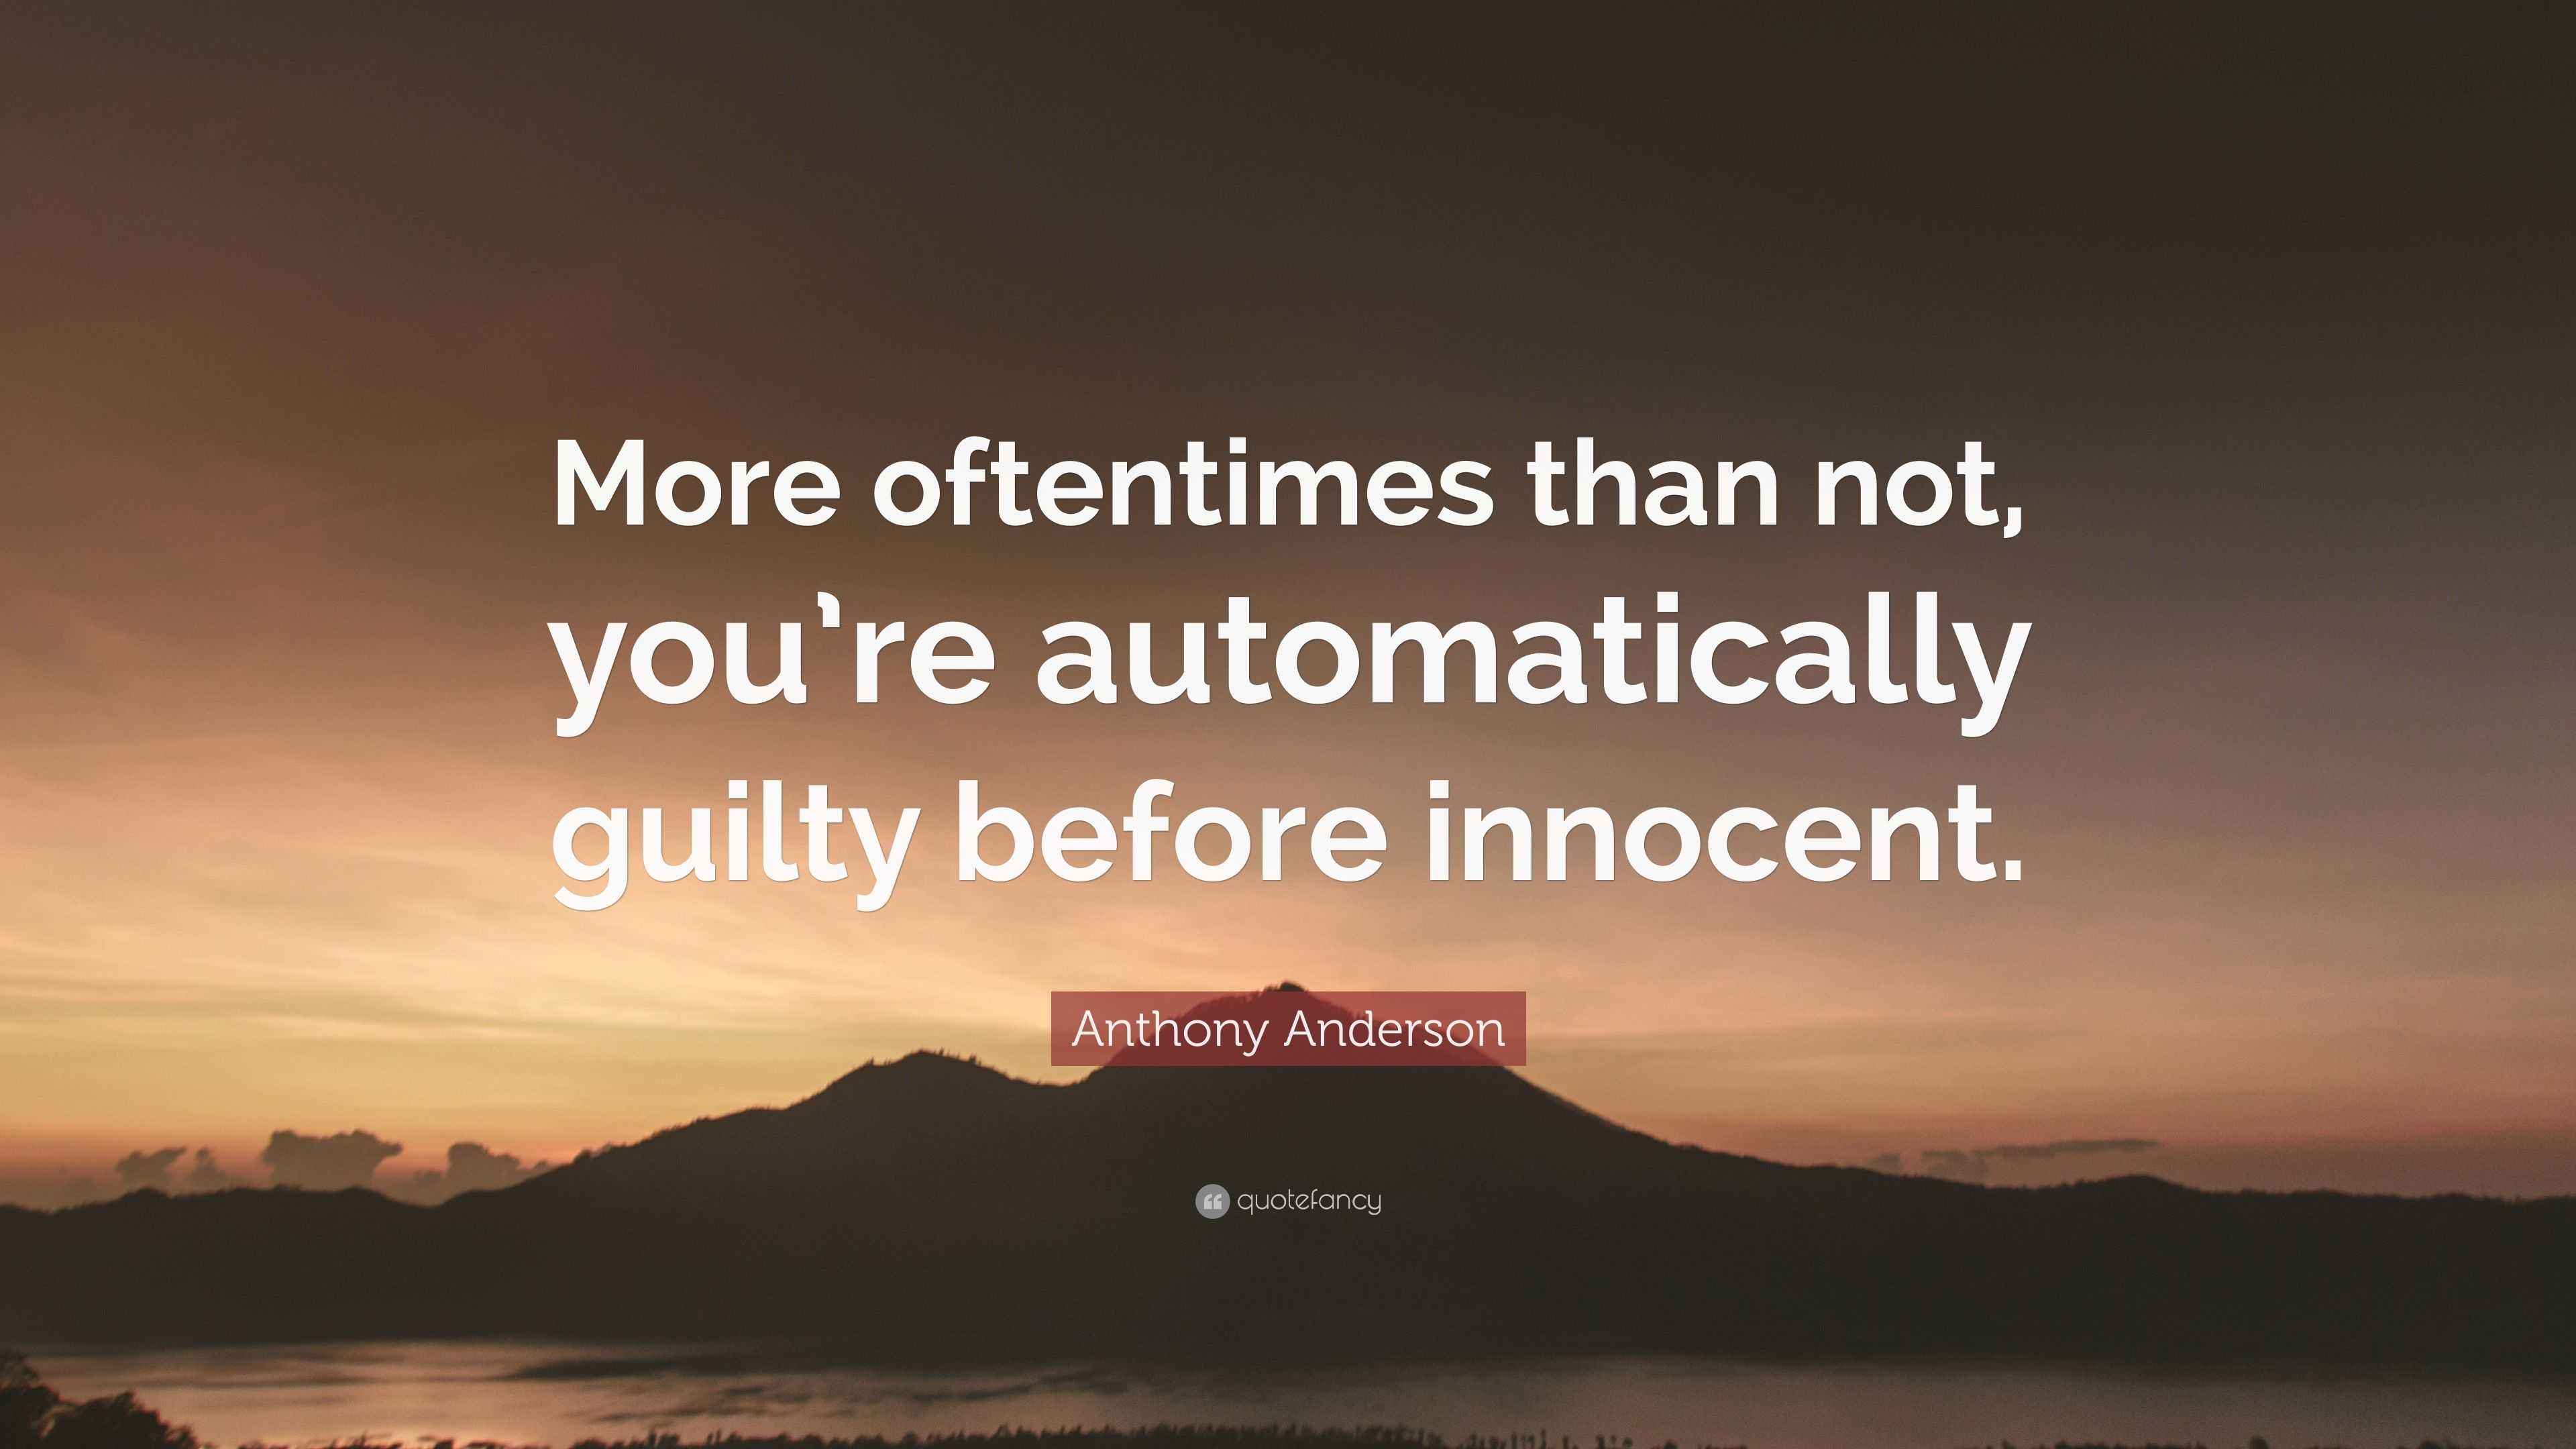 Anthony Anderson Quote: “More oftentimes than not, you’re automatically ...